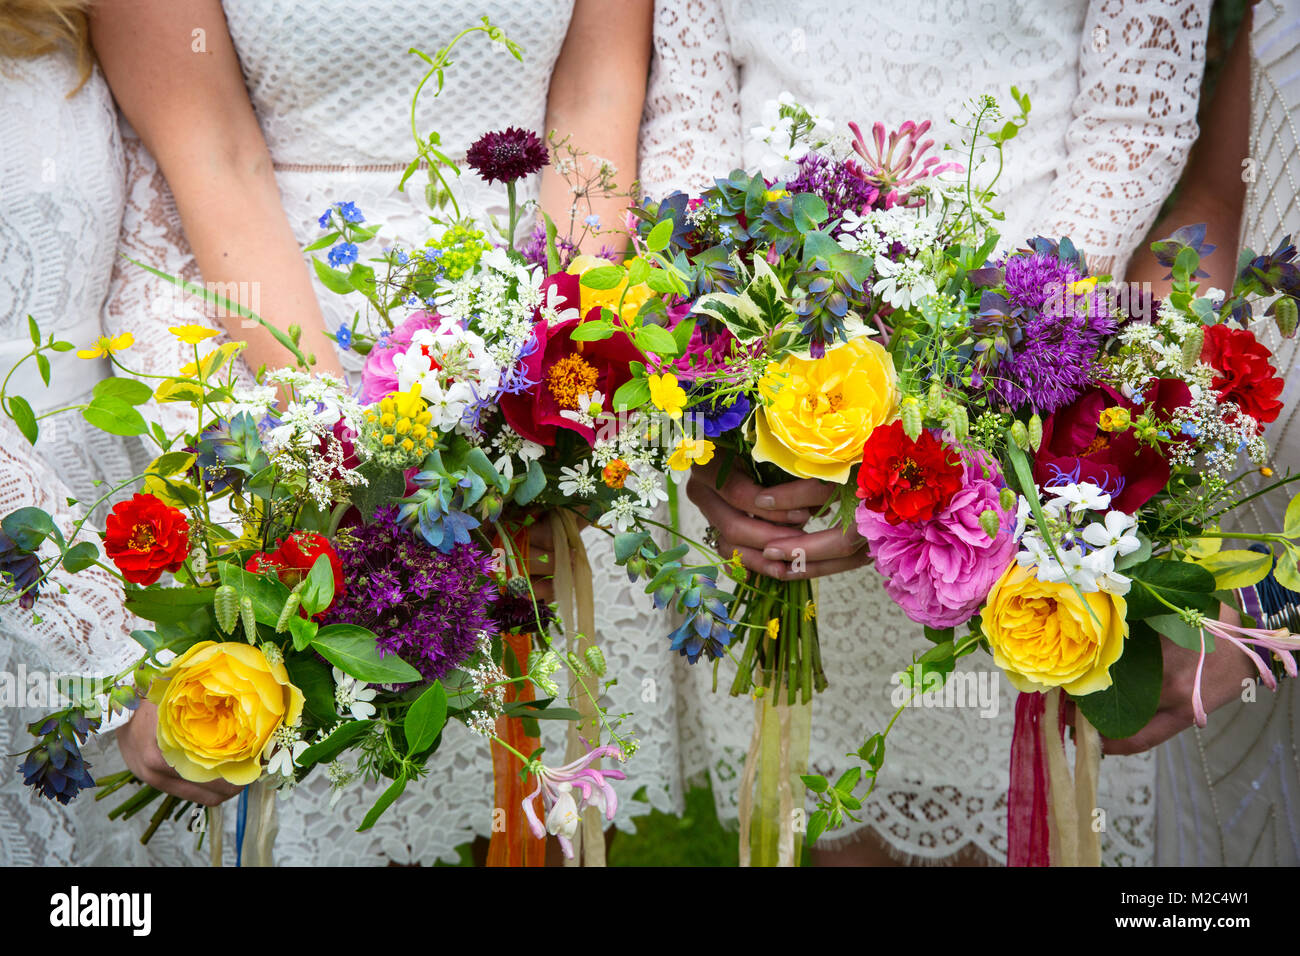 Bridesmaids holding colourful bouquets of flowers, mid section, close-up Stock Photo